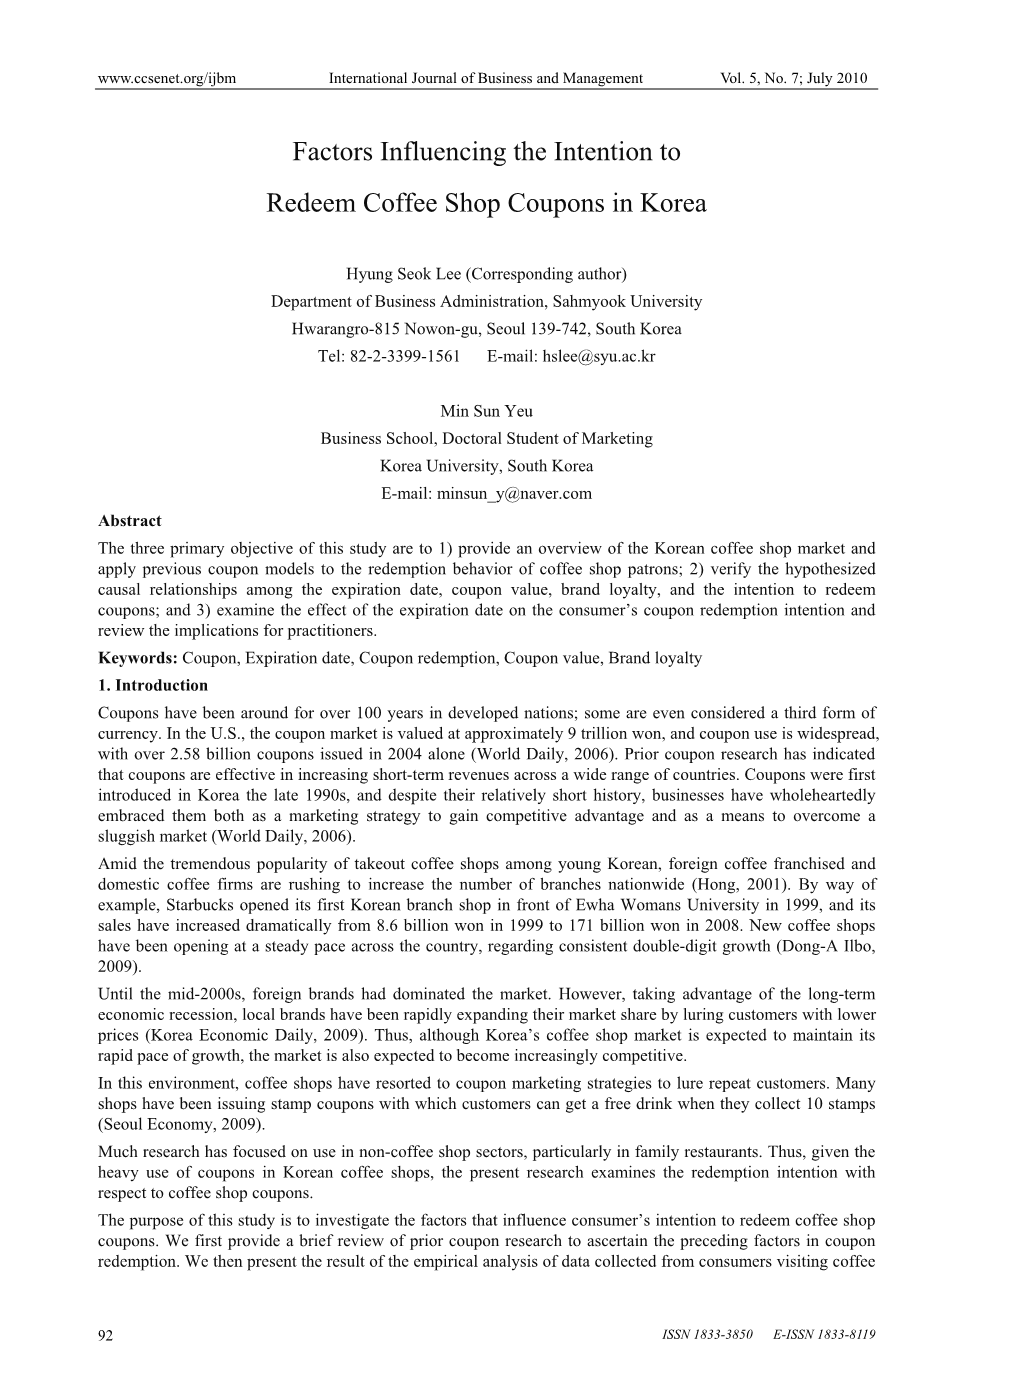 Factors Influencing the Intention to Redeem Coffee Shop Coupons in Korea